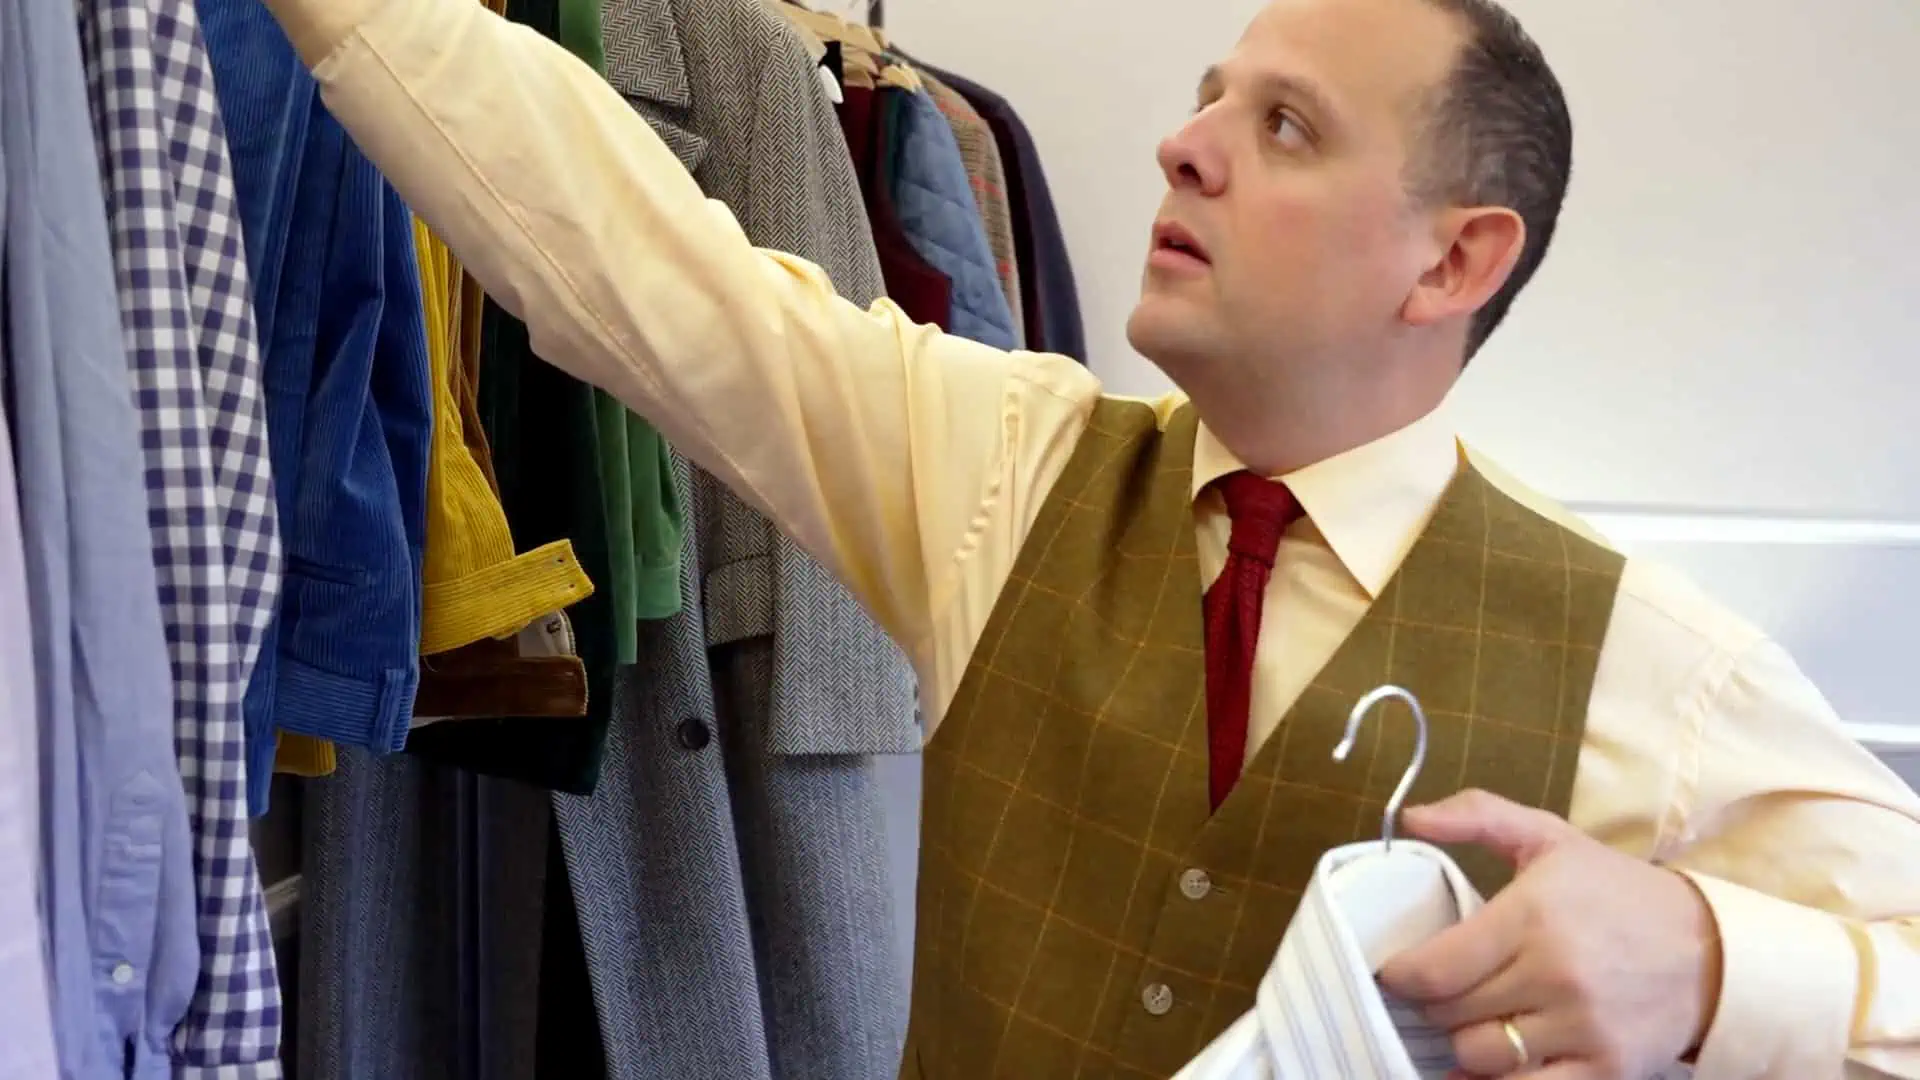 Raphael searches through the shirts he packed for Pitti Uomo 105